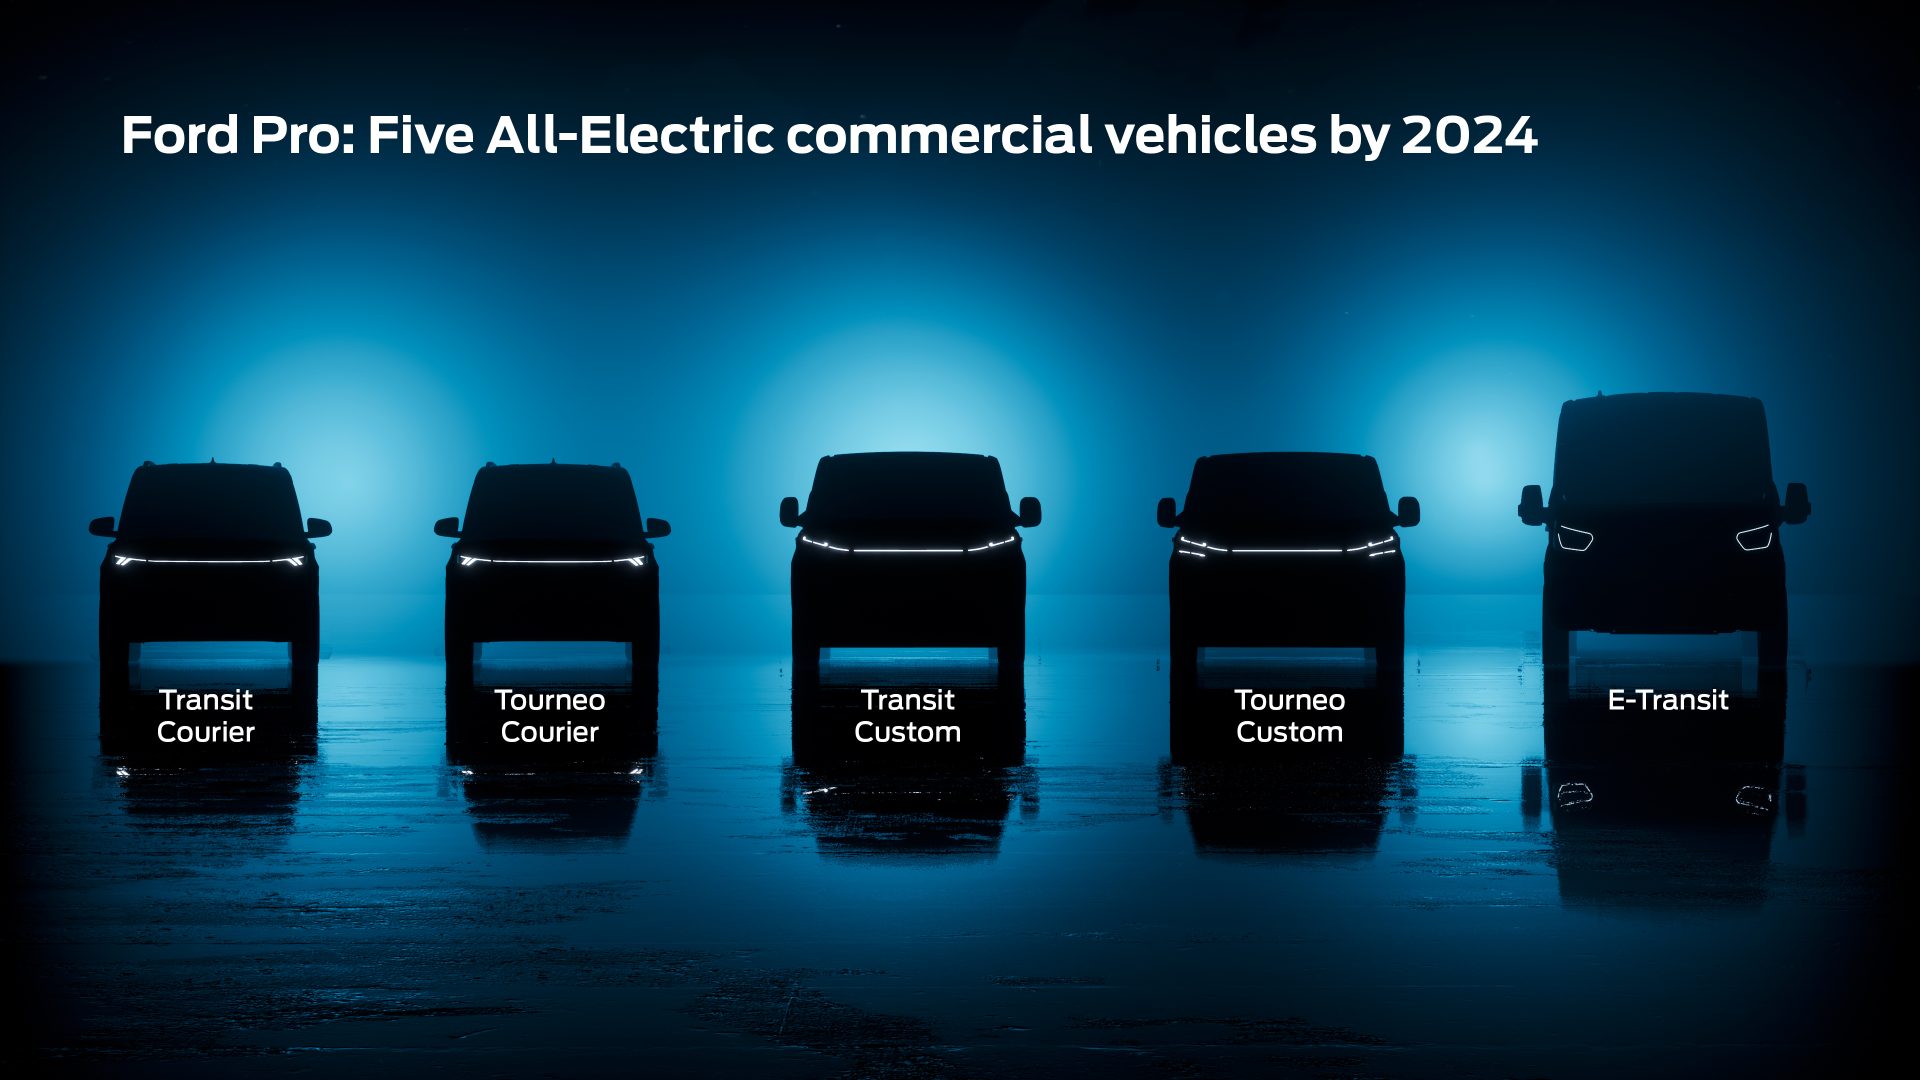 All electric commercial vehicles Πώς θα "ηλεκτριστούν" όλα τα μοντέλα της Ford